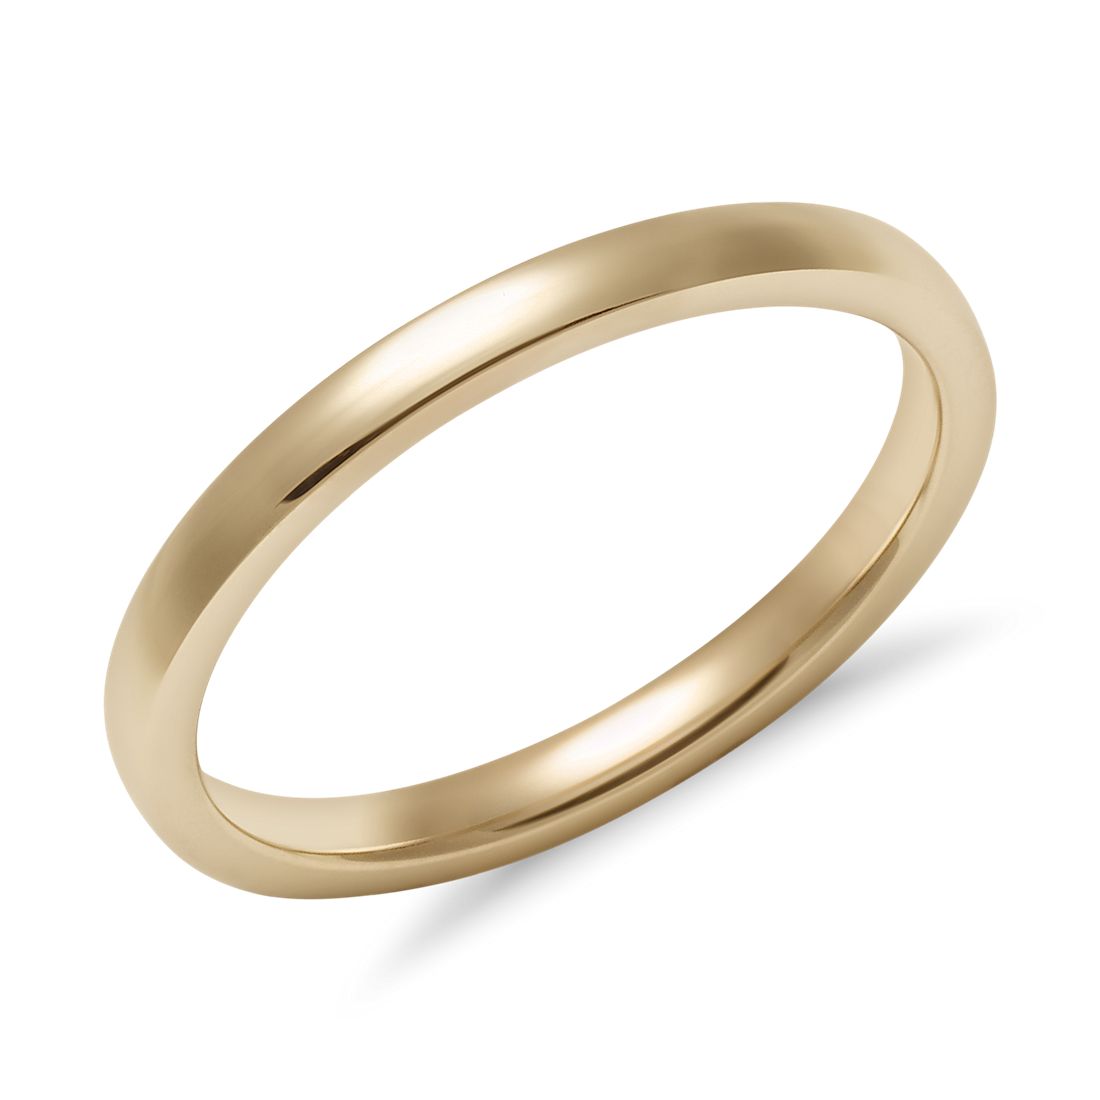 14K Yellow Gold 2mm Flat Comfort Fit Band 